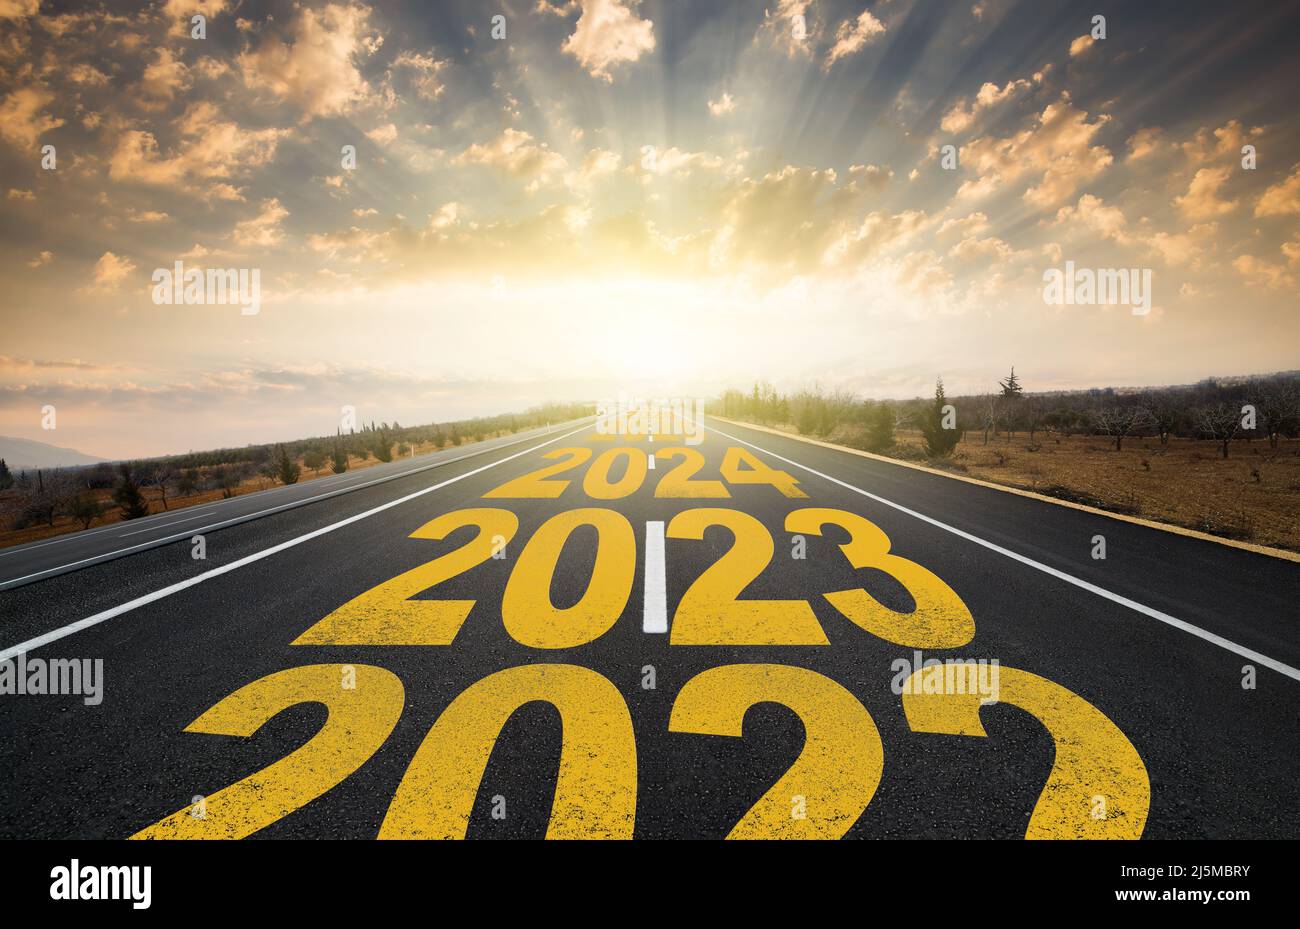 The word 2023 written on highway road in the middle of empty asphalt road at golden sunrise. New year 2023 concept. Concept of planning and challenge Stock Photo